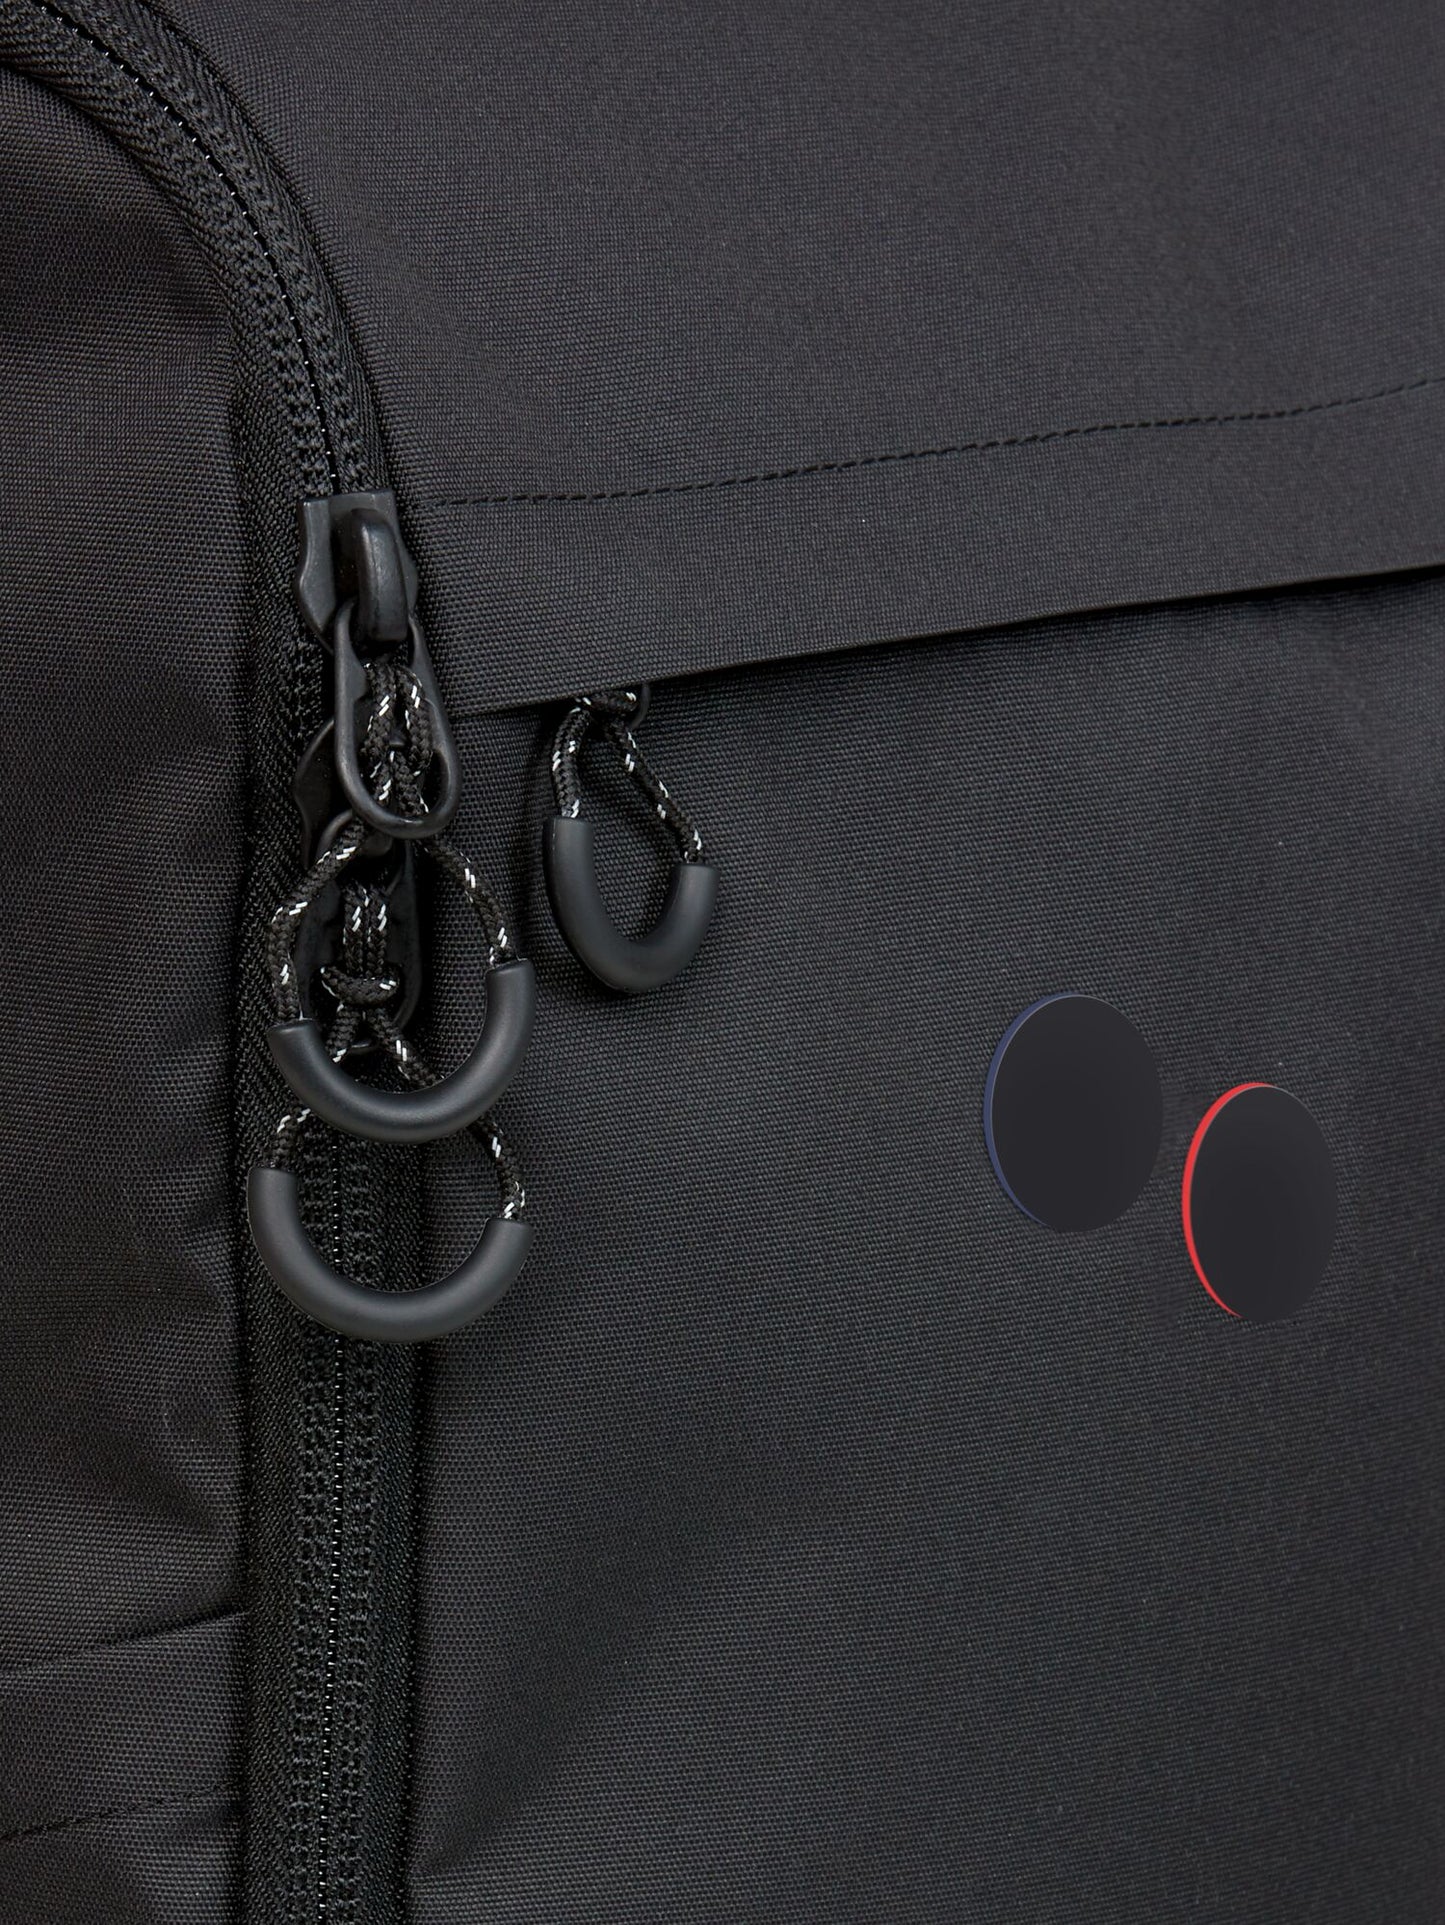 pinqponq-backpack-purik-rooted-black-detail